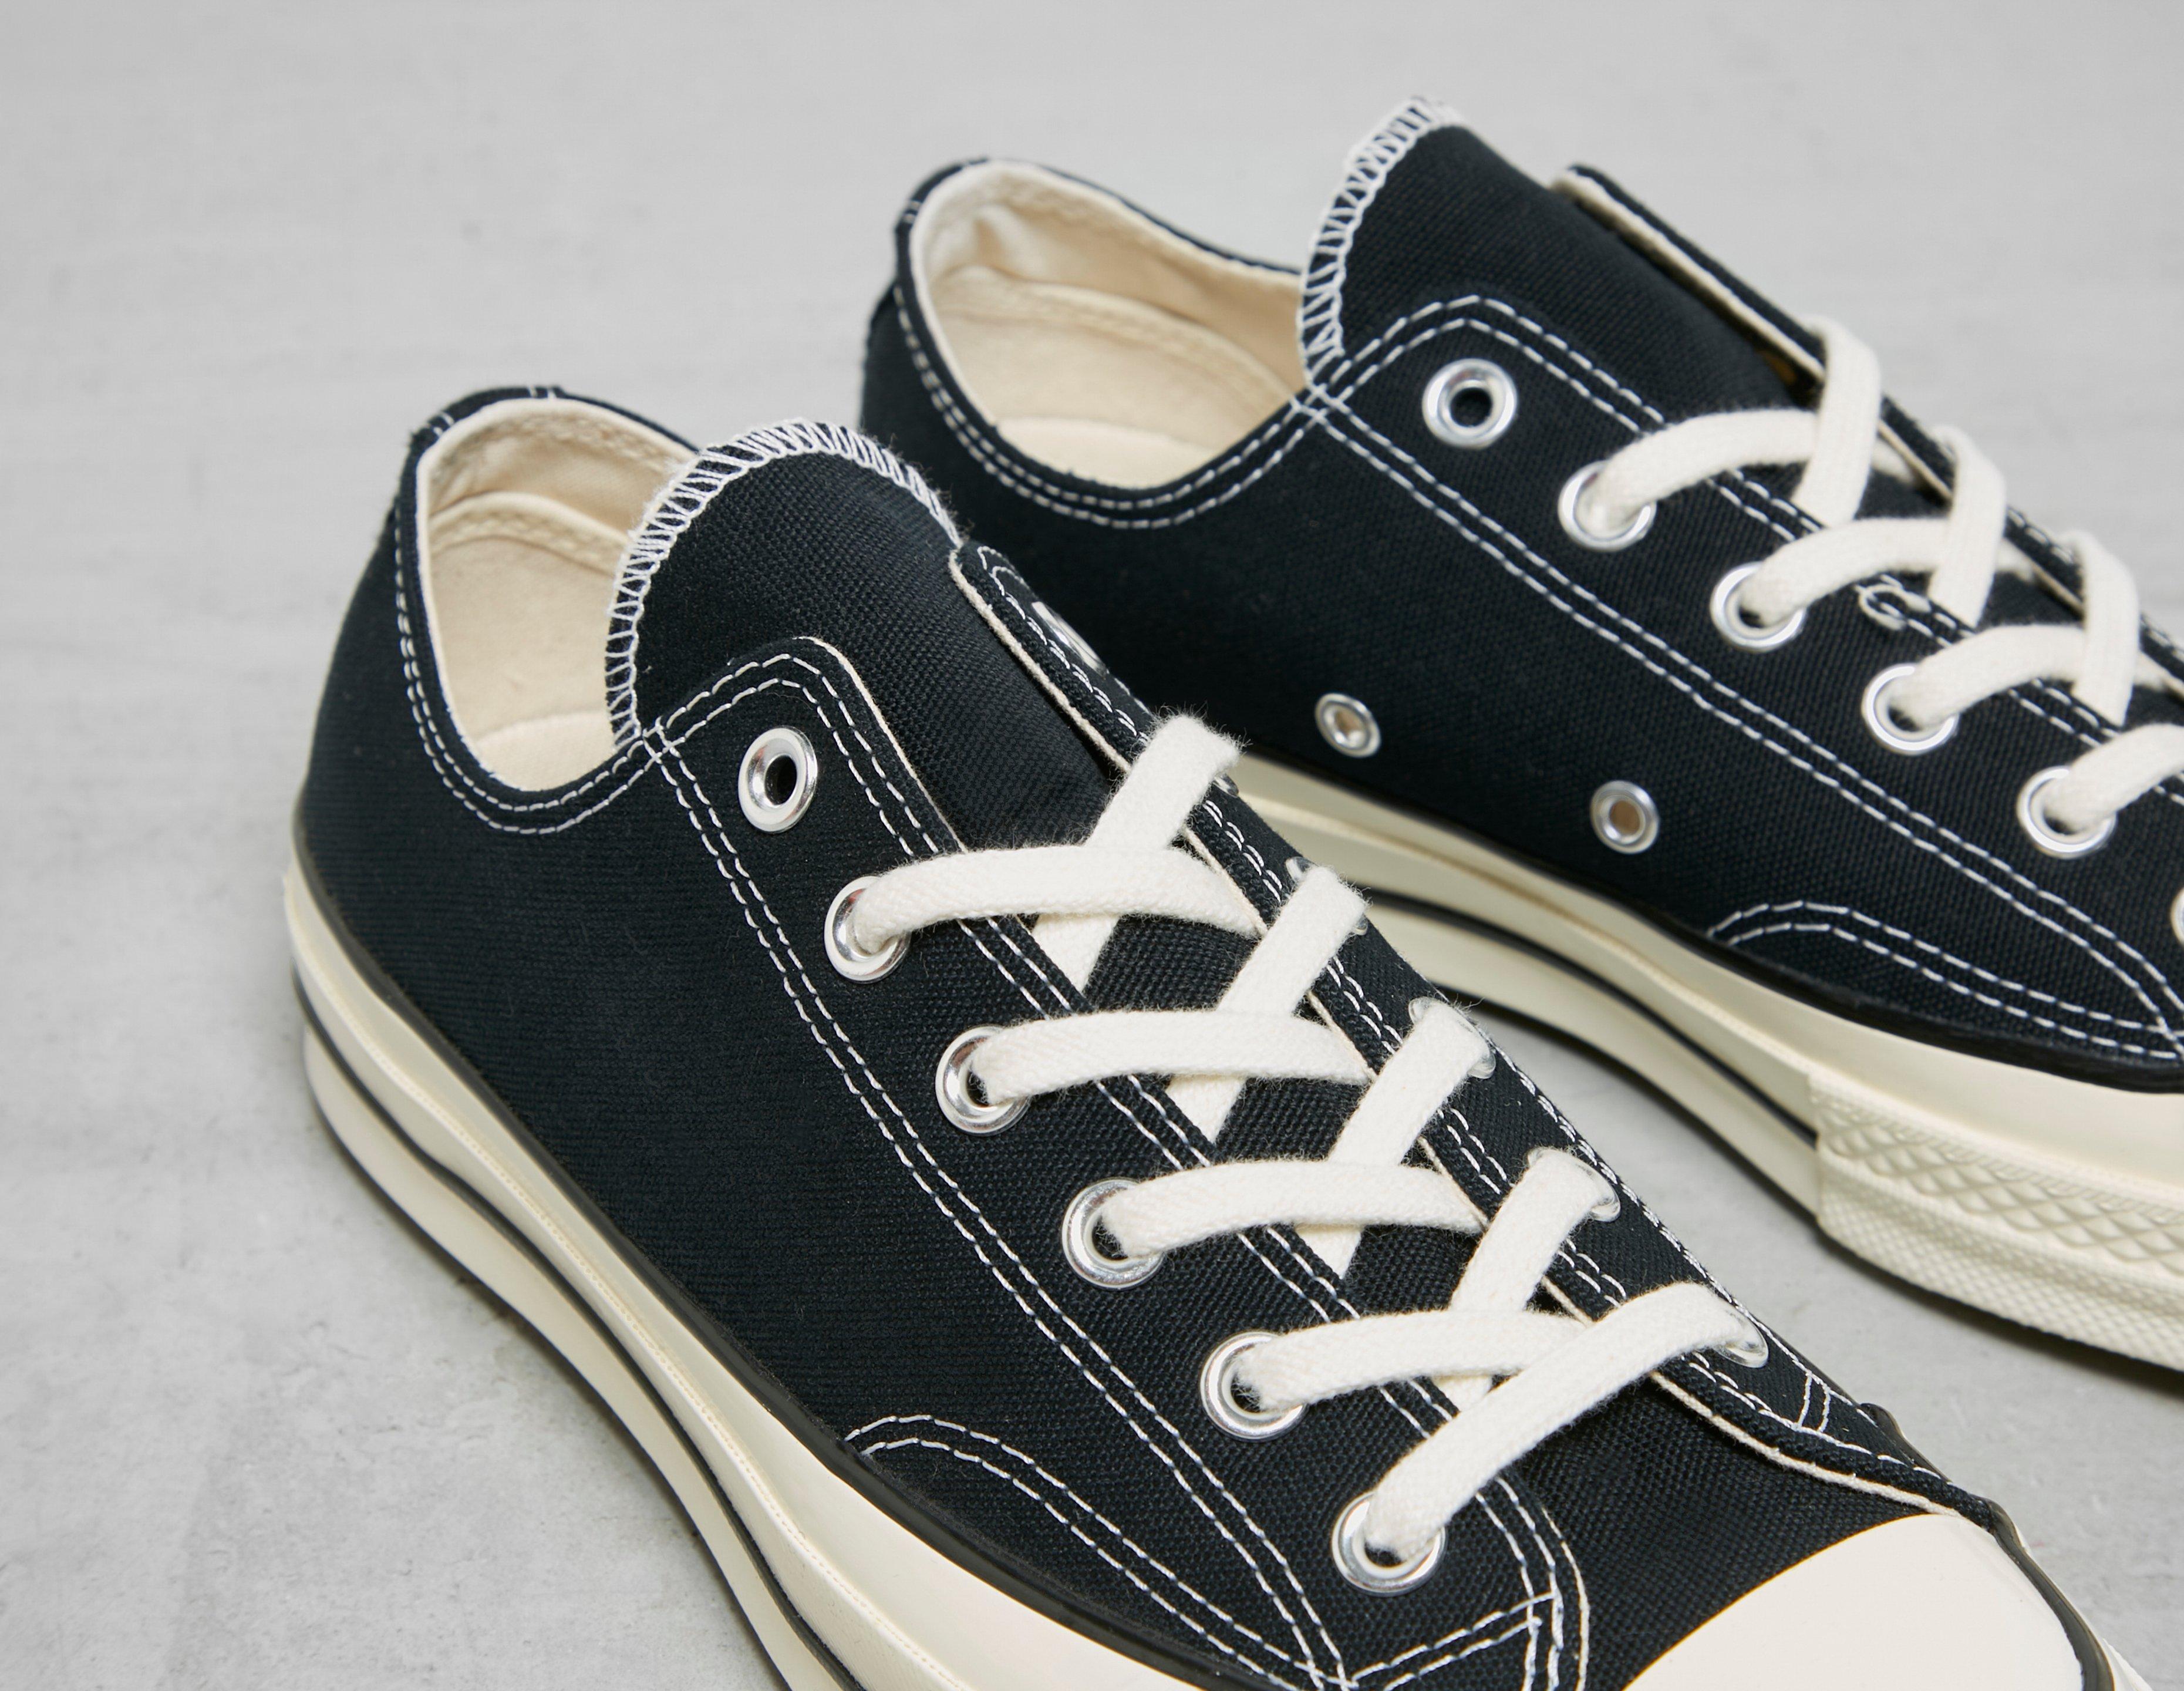 converse chuck taylor all star 70 low femme